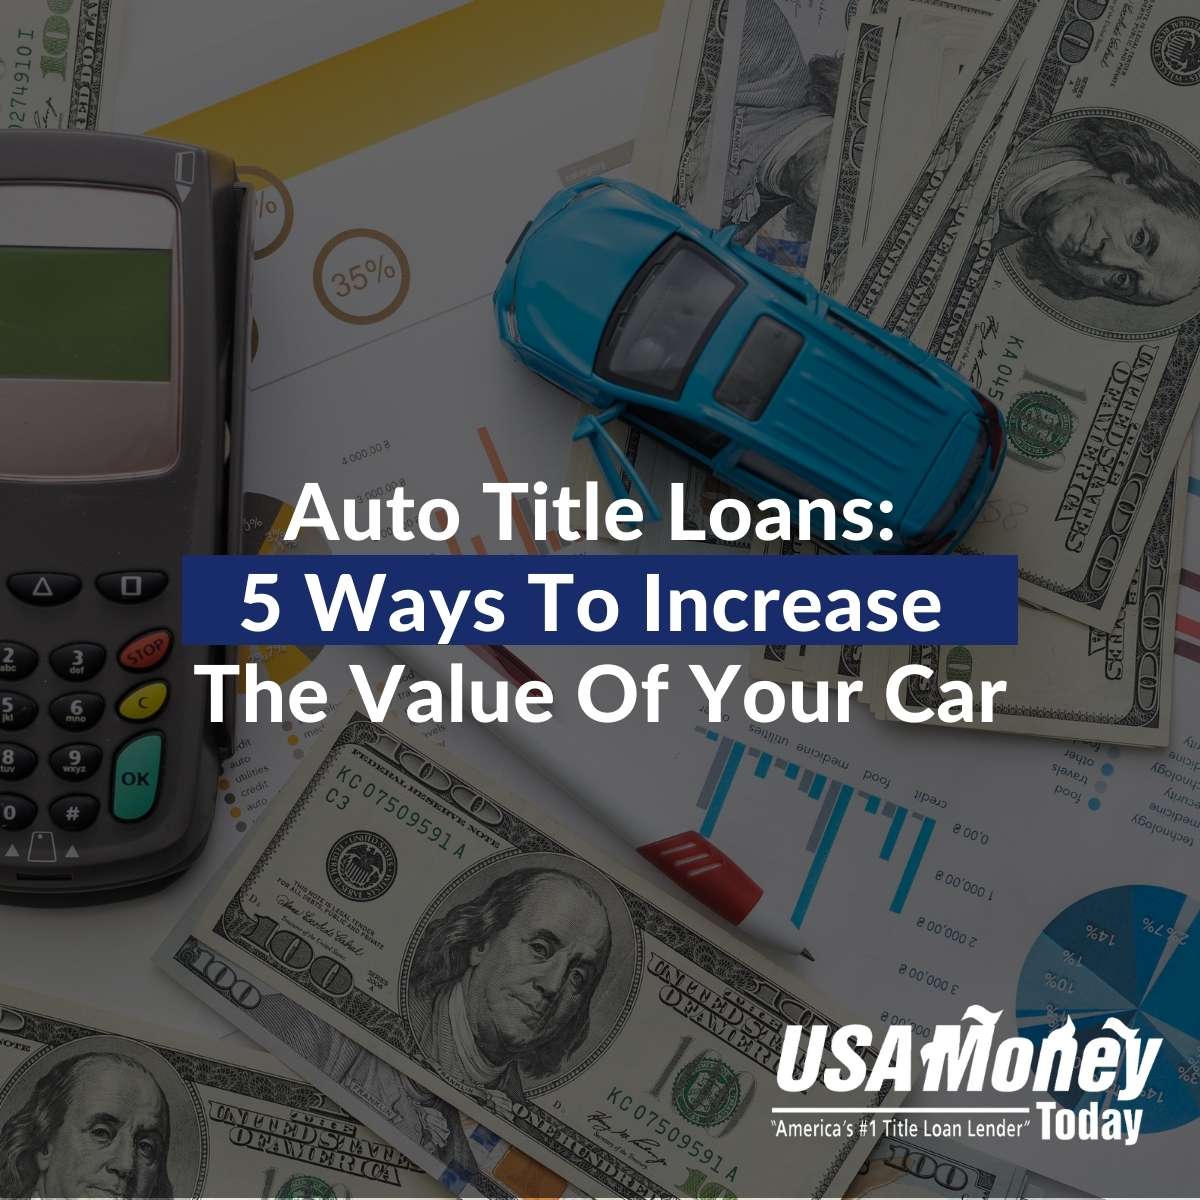 Auto Title Loans: 5 Ways To Increase The Value Of Your Car